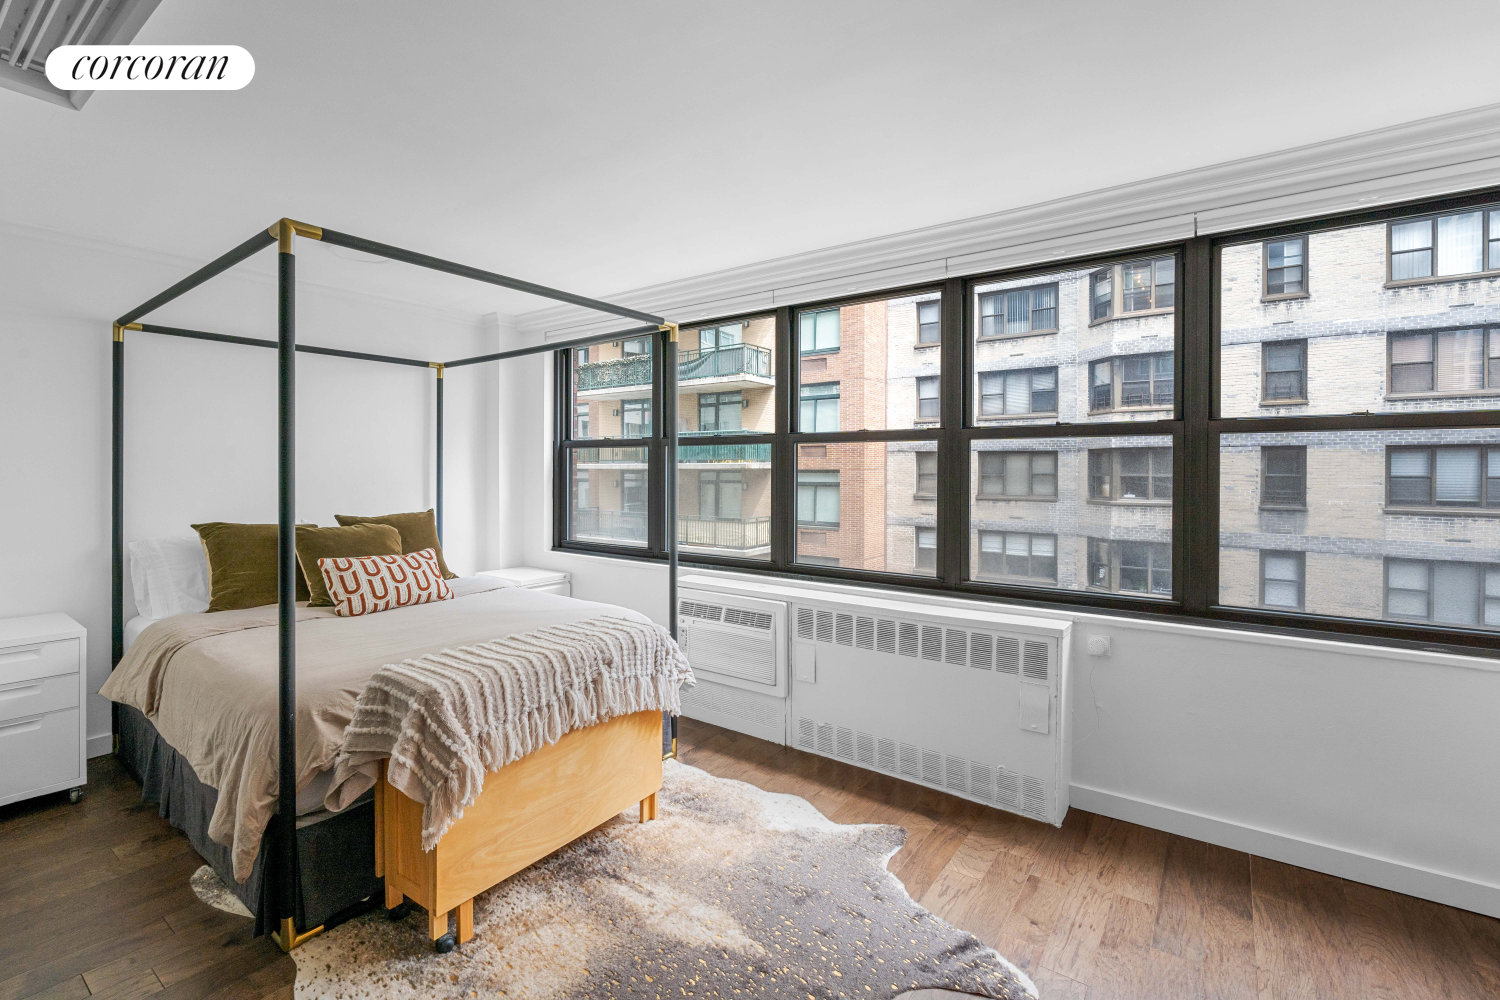 209 East 56th Street 10A, Sutton, Midtown East, NYC - 1 Bedrooms  
1 Bathrooms  
2 Rooms - 